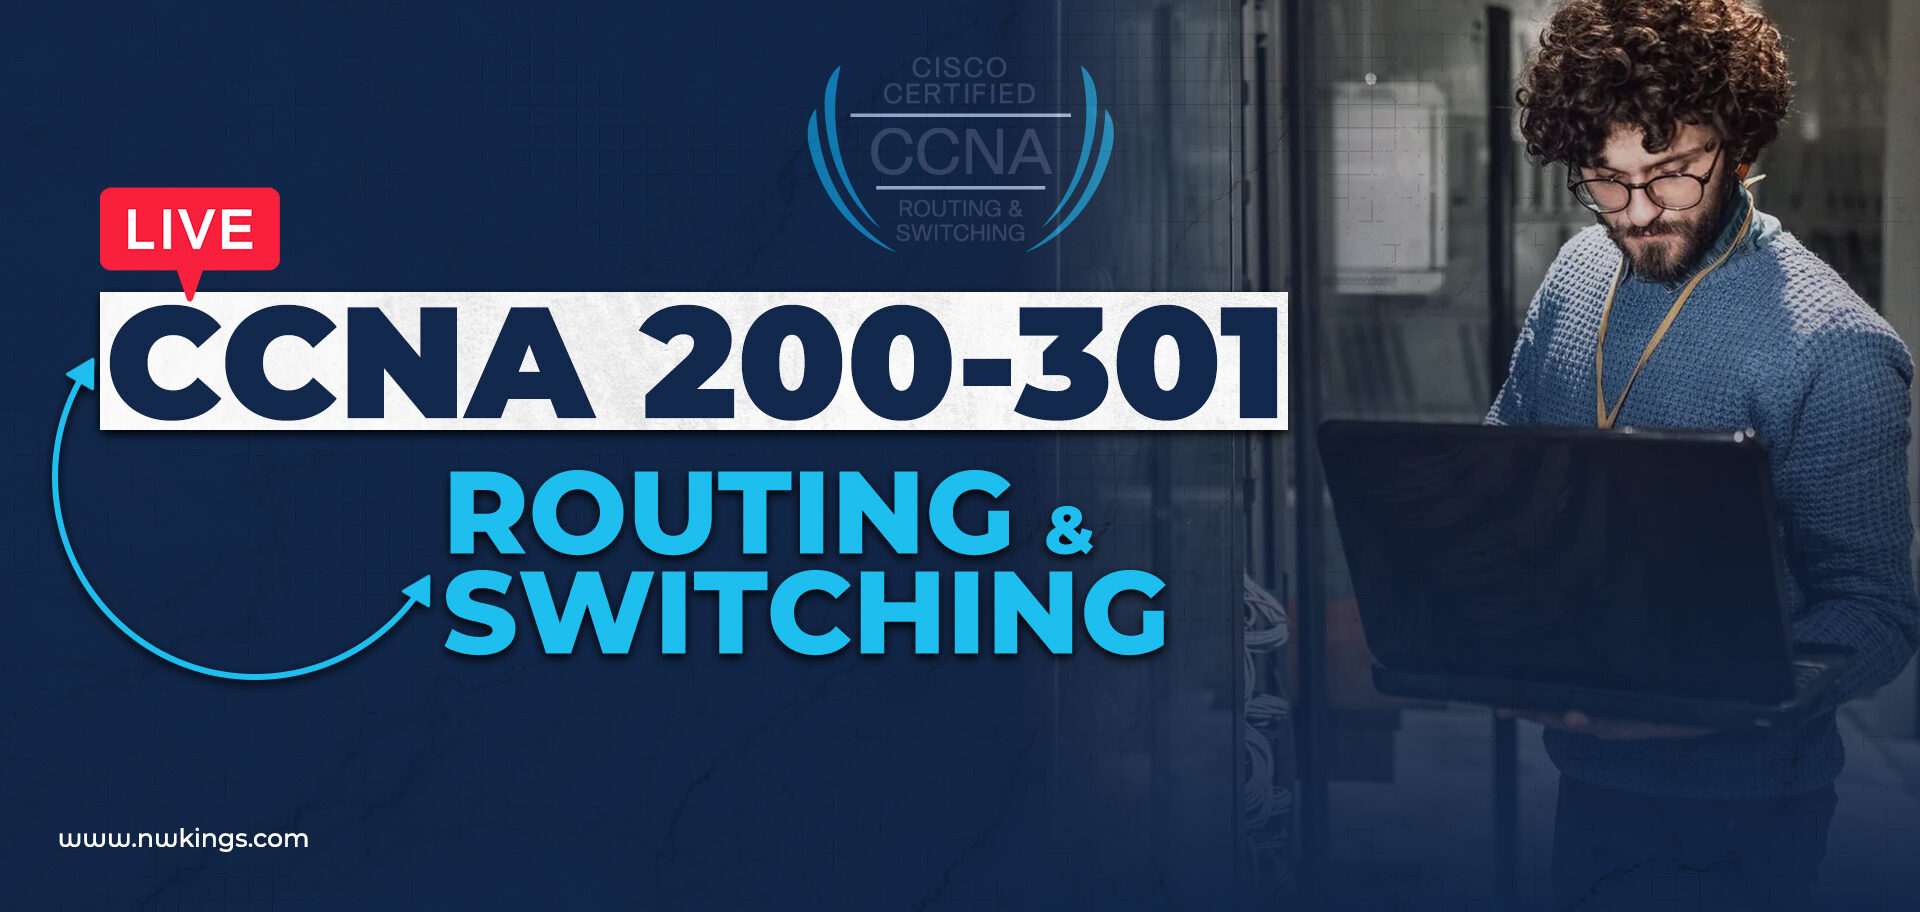 routing and switching interview questions, routing and switching basics pdf, routing and switching protocols, routing and switching interview questions pdf, routing and switching essentials, routing and switching basics, routing and switching jobs, routing and switching cisco, routing and switching mcqs, ccna routing and switching, ccnp routing and switching, ccna routing and switching pdf, cisco routing and switching, hcia routing and switching, ccie routing and switching, ccnp routing and switching pdf, difference between routing and switching, cct routing and switching,, ccna routing and switching syllabus